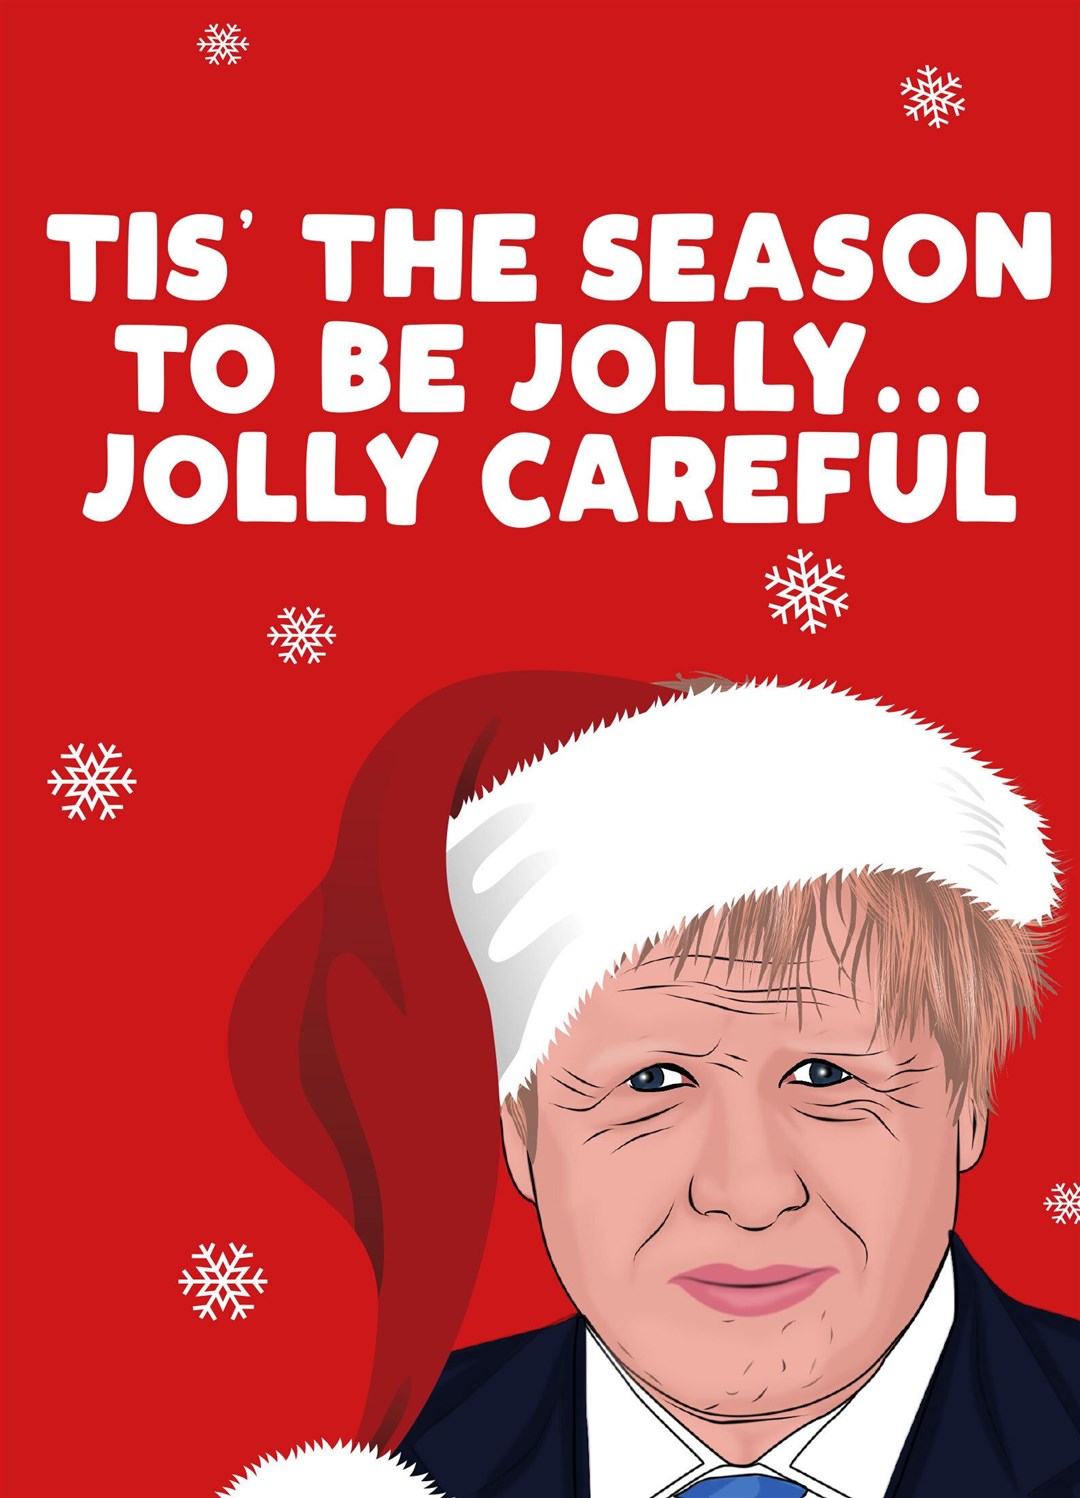 A Moonpig Christmas card design is among those inspired by Prime Minister Boris Johnson’s “jolly careful” speech (Moonpig/PA)